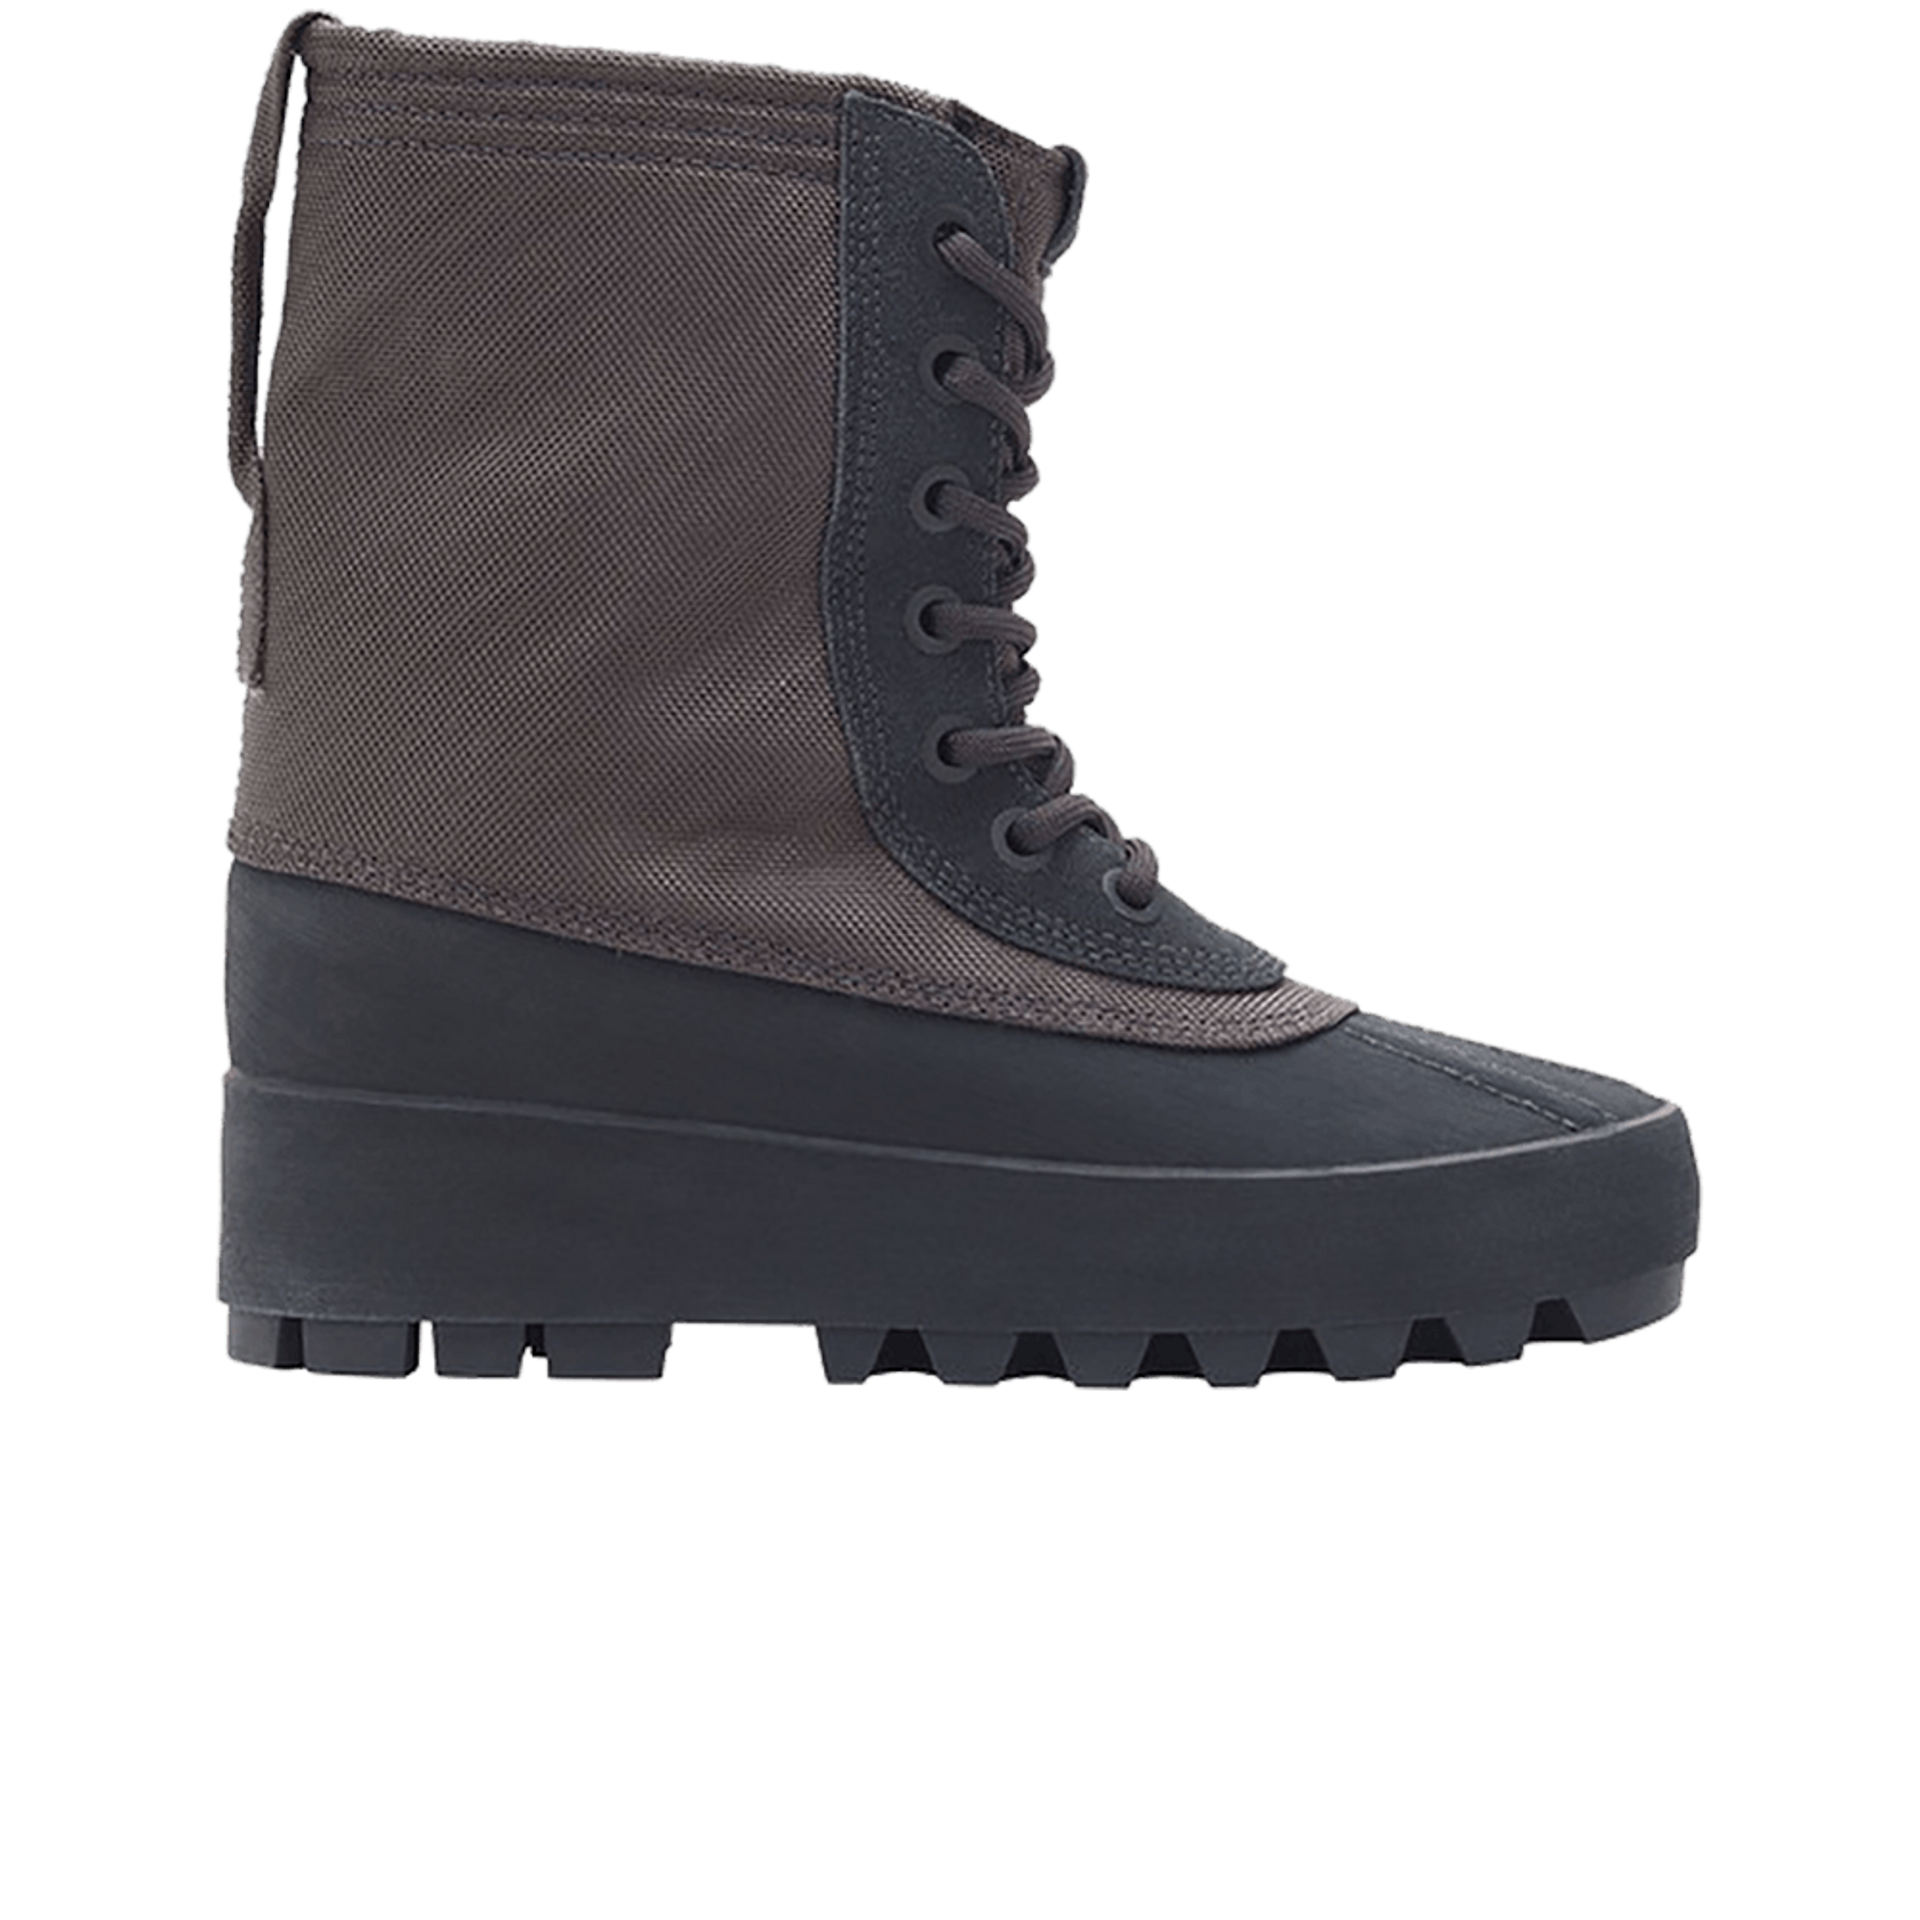 Wmns Yeezy 950 Boot 'Pirate'